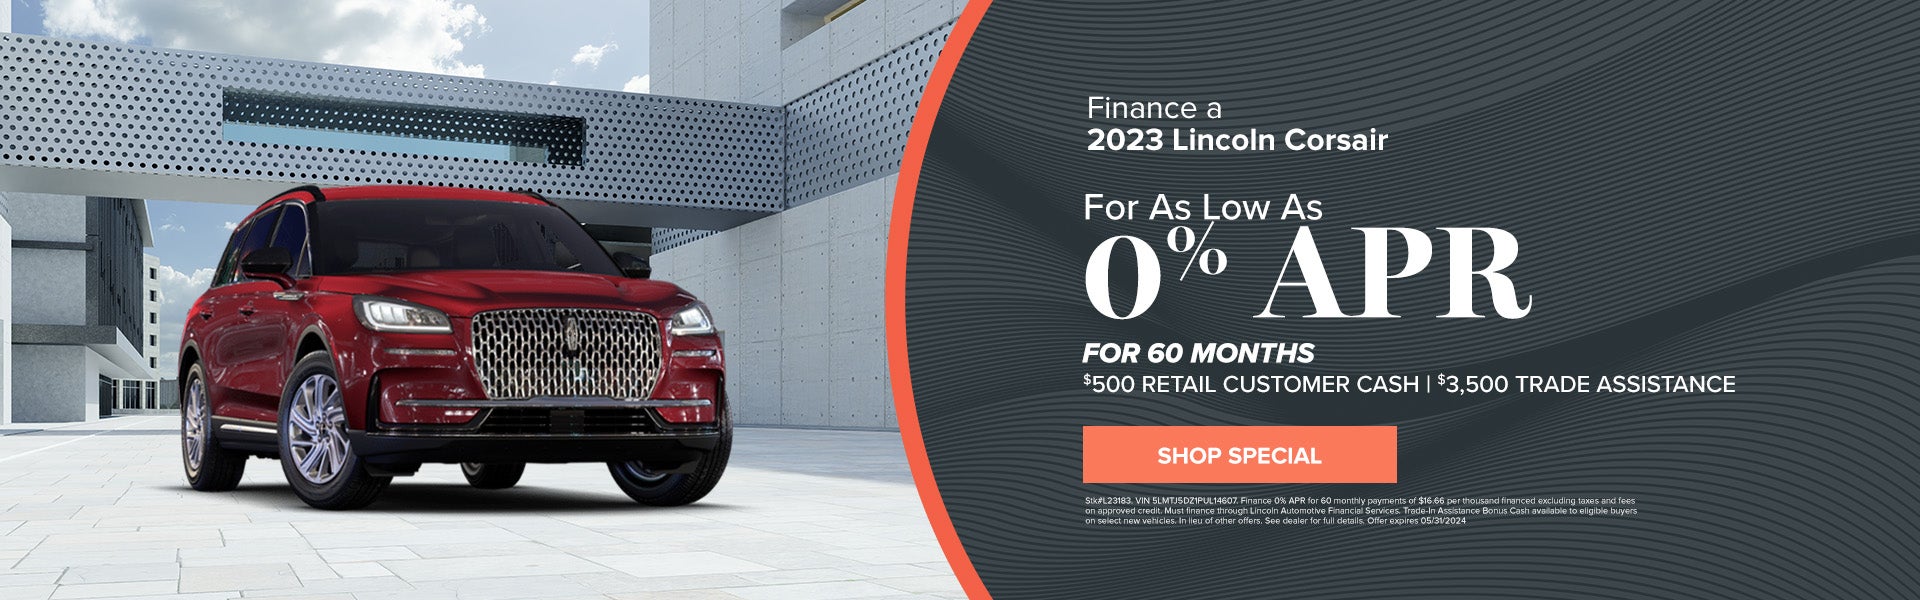 Finance A 2023 Lincoln Corsair As Low As 0% APR For 60 Mon